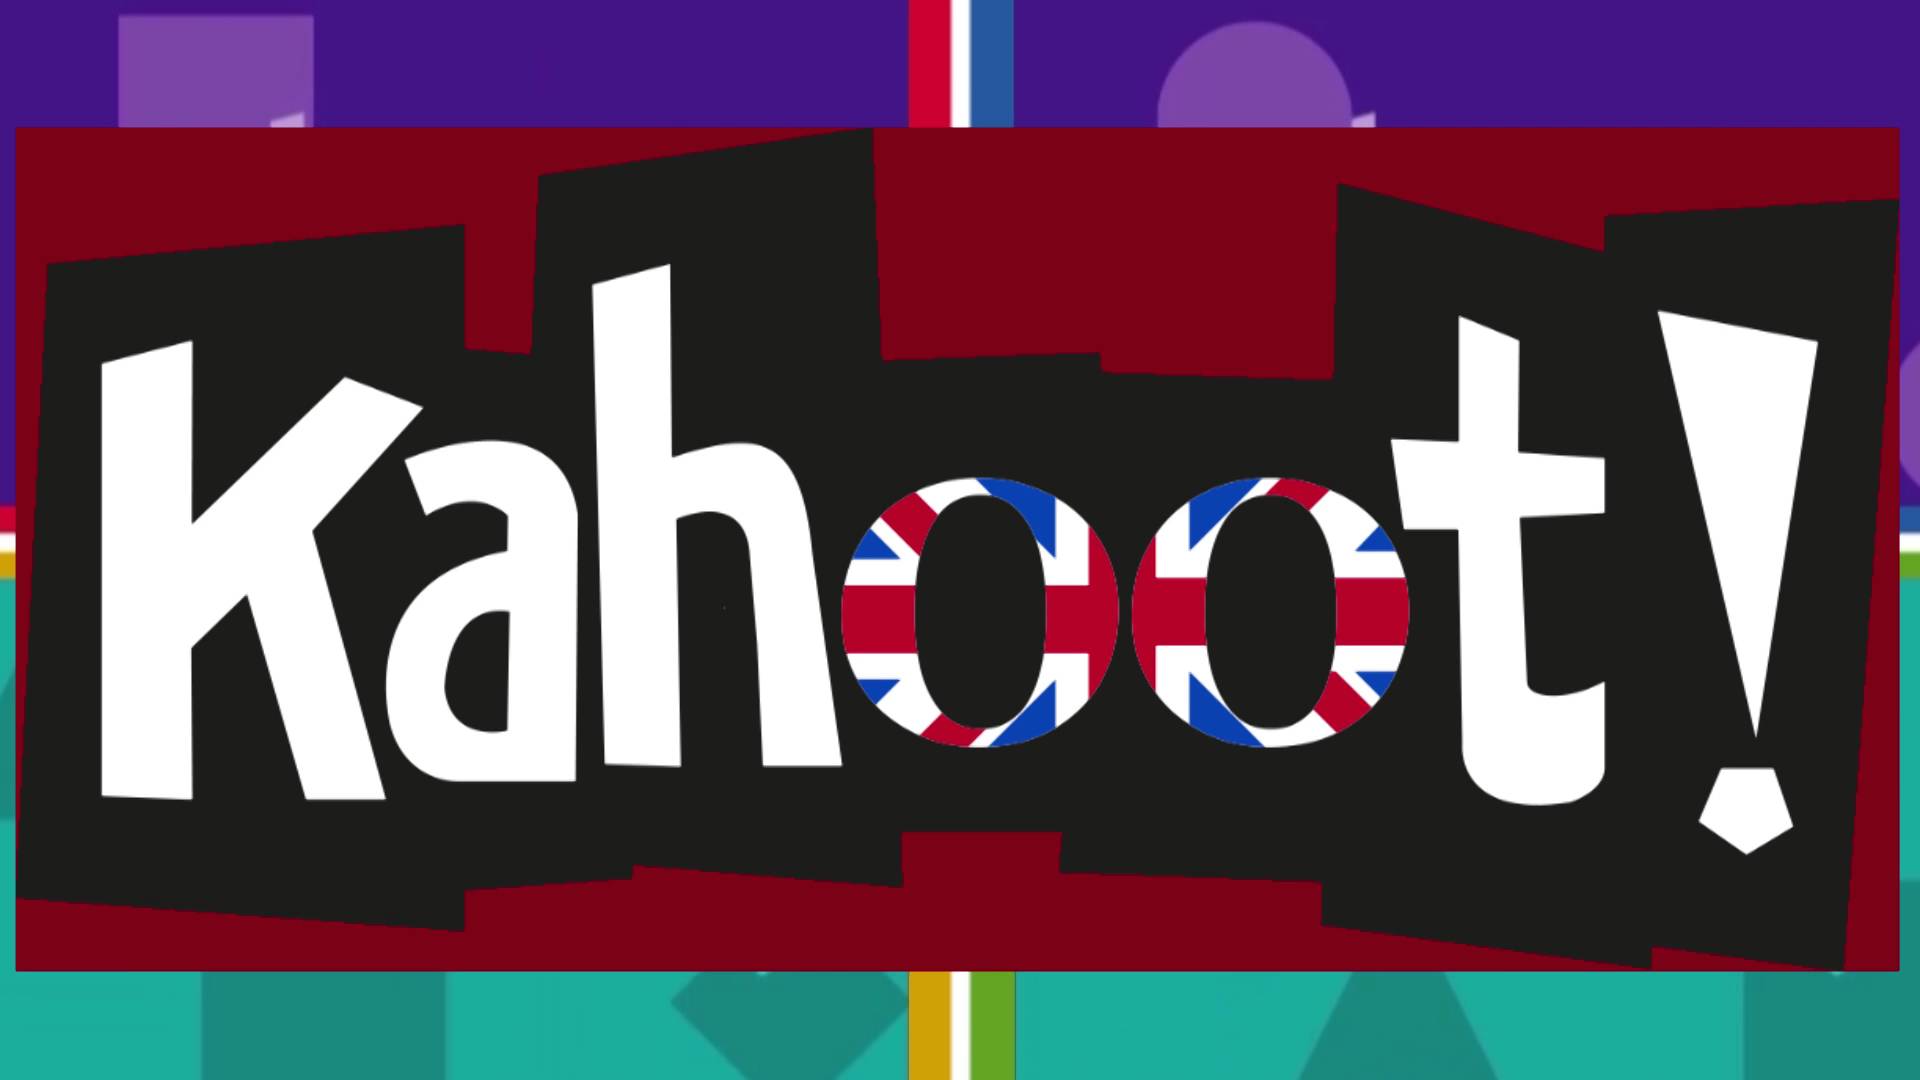 KAHOOT IN Game Music (British Month) (30 Second Countdown)